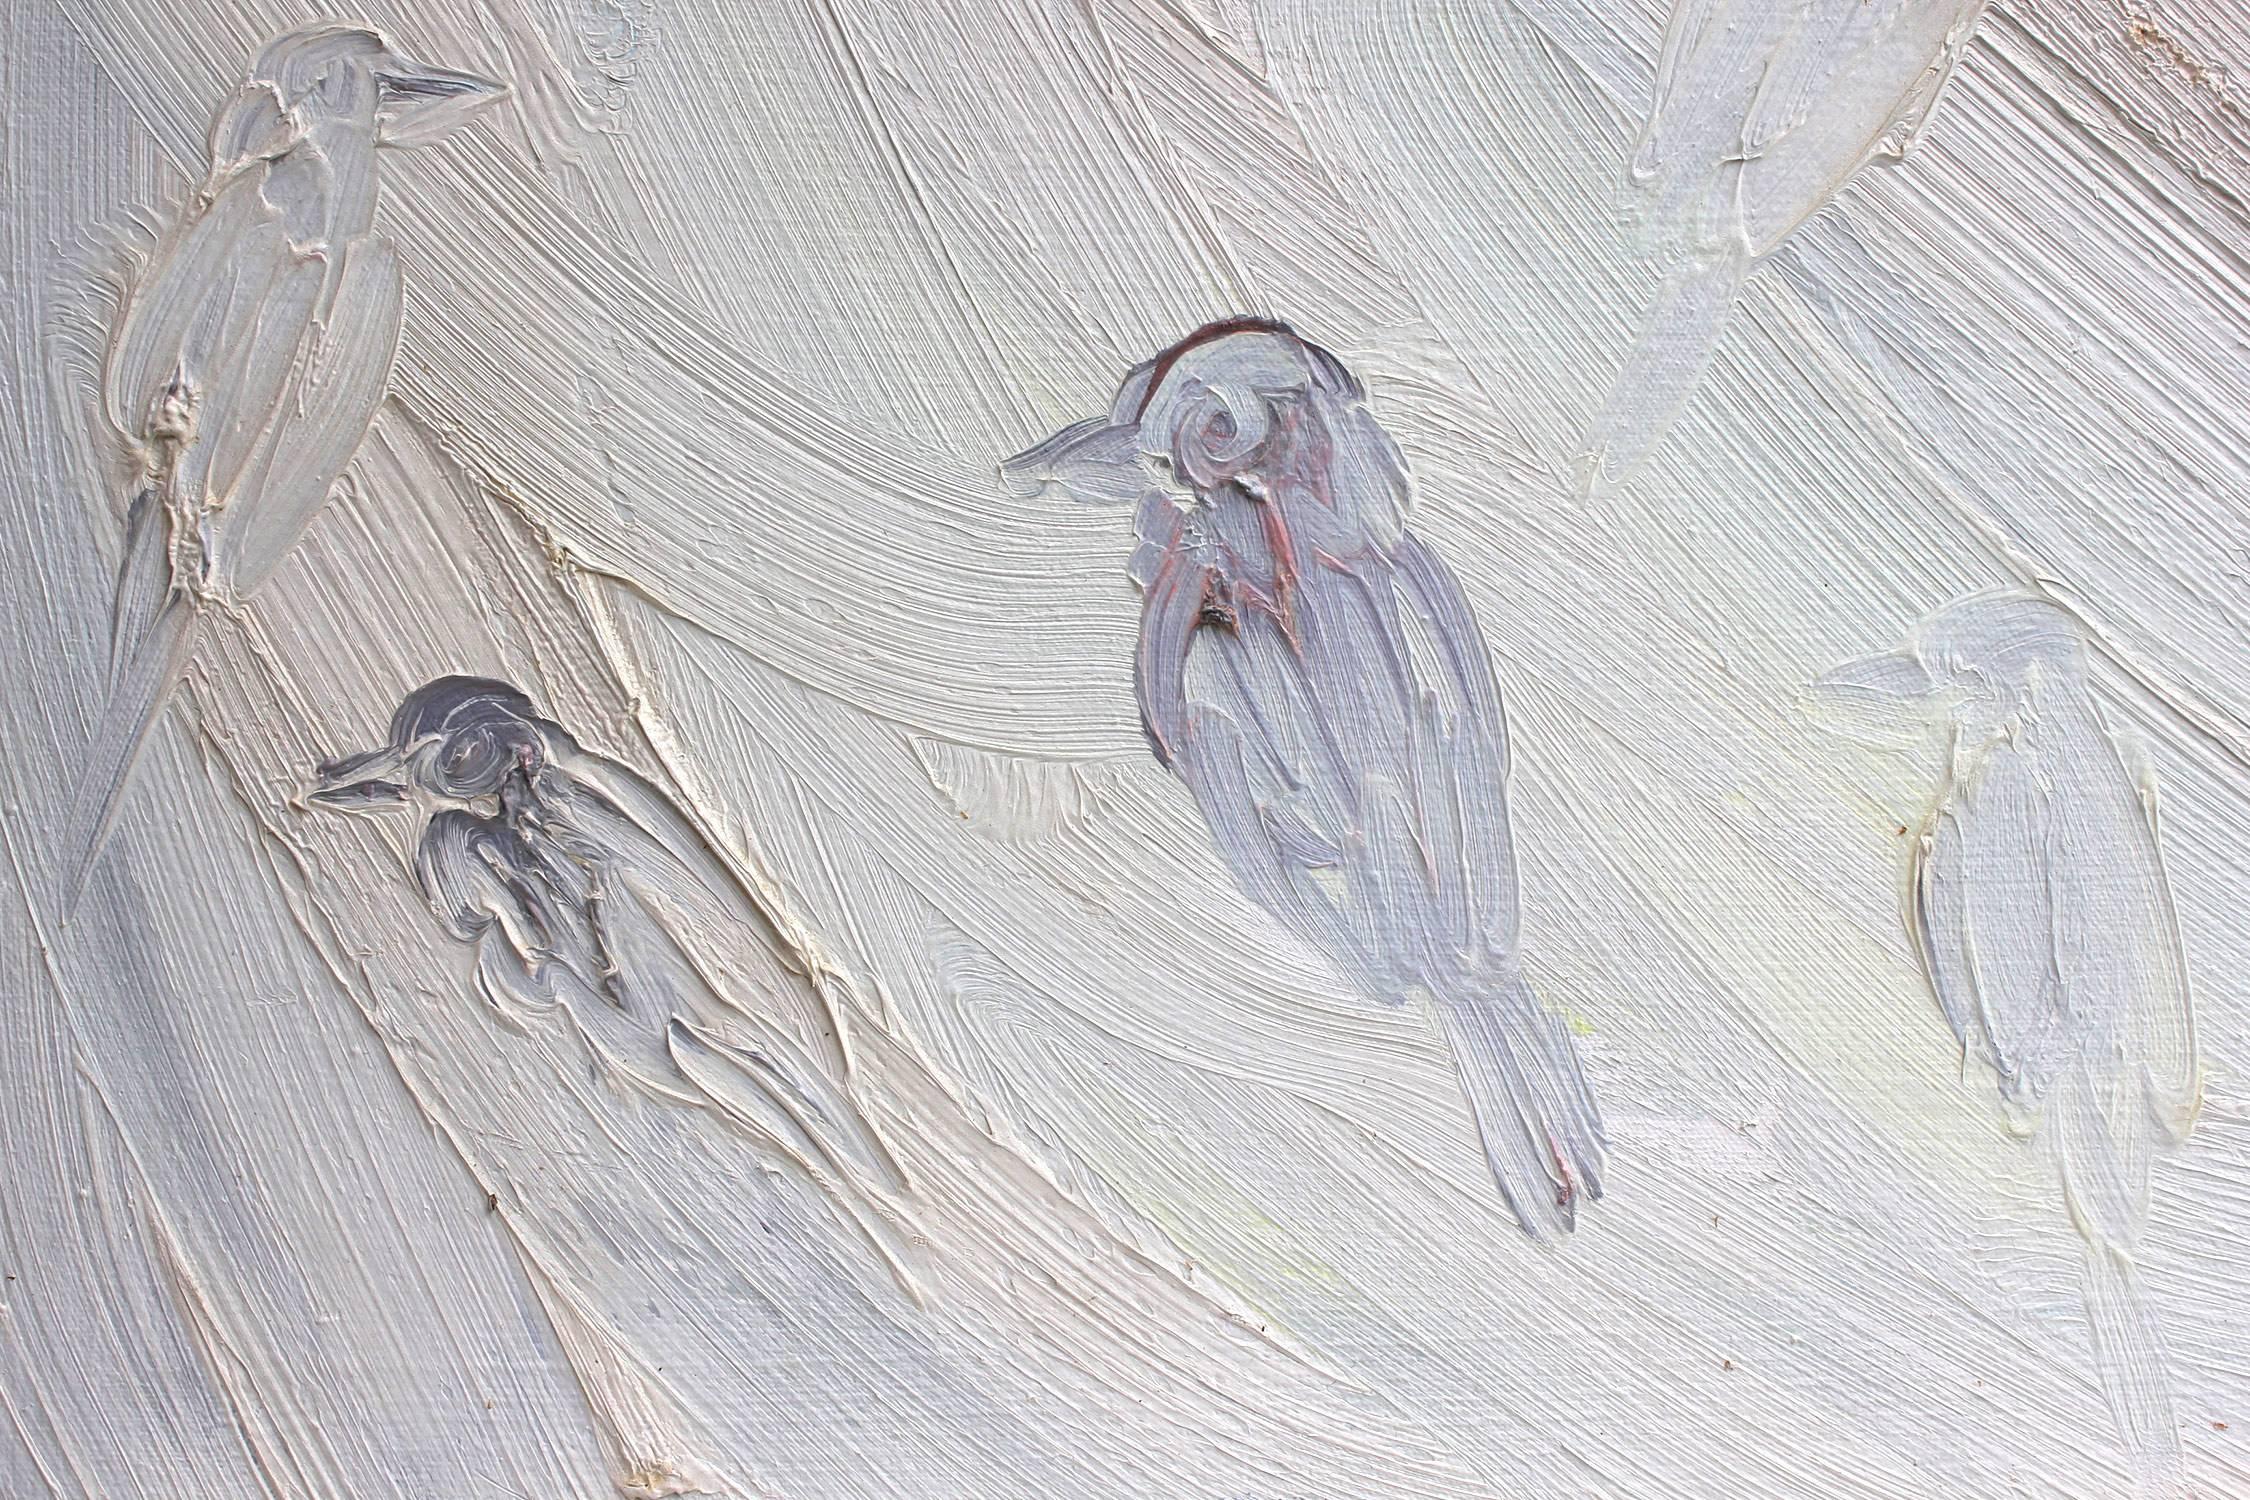 A wonderful composition of one of Slonem's most iconic subjects of birds. The thick use of paint is greatly recognizable as he slathers on layer after layer. He then draws in these whimsical birds as if they are in motion, either perched or about to